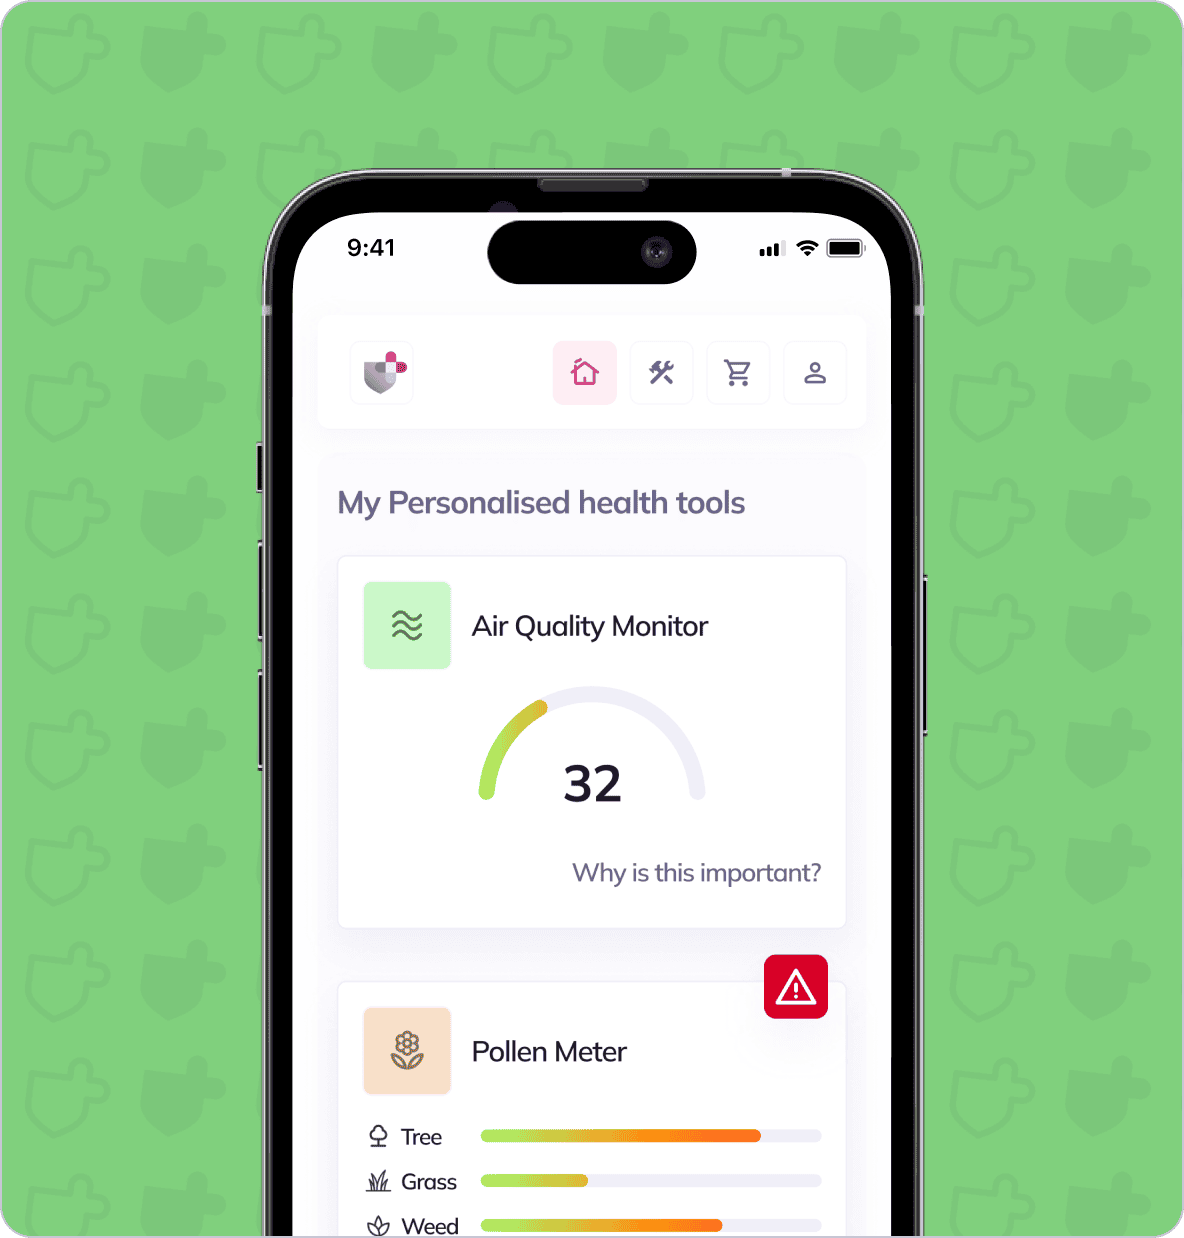 Smartphone screen displaying a health app with an Air Quality Monitor showing a value of 32 and a Pollen Meter indicating levels for tree, grass, and weed pollen against a green background.